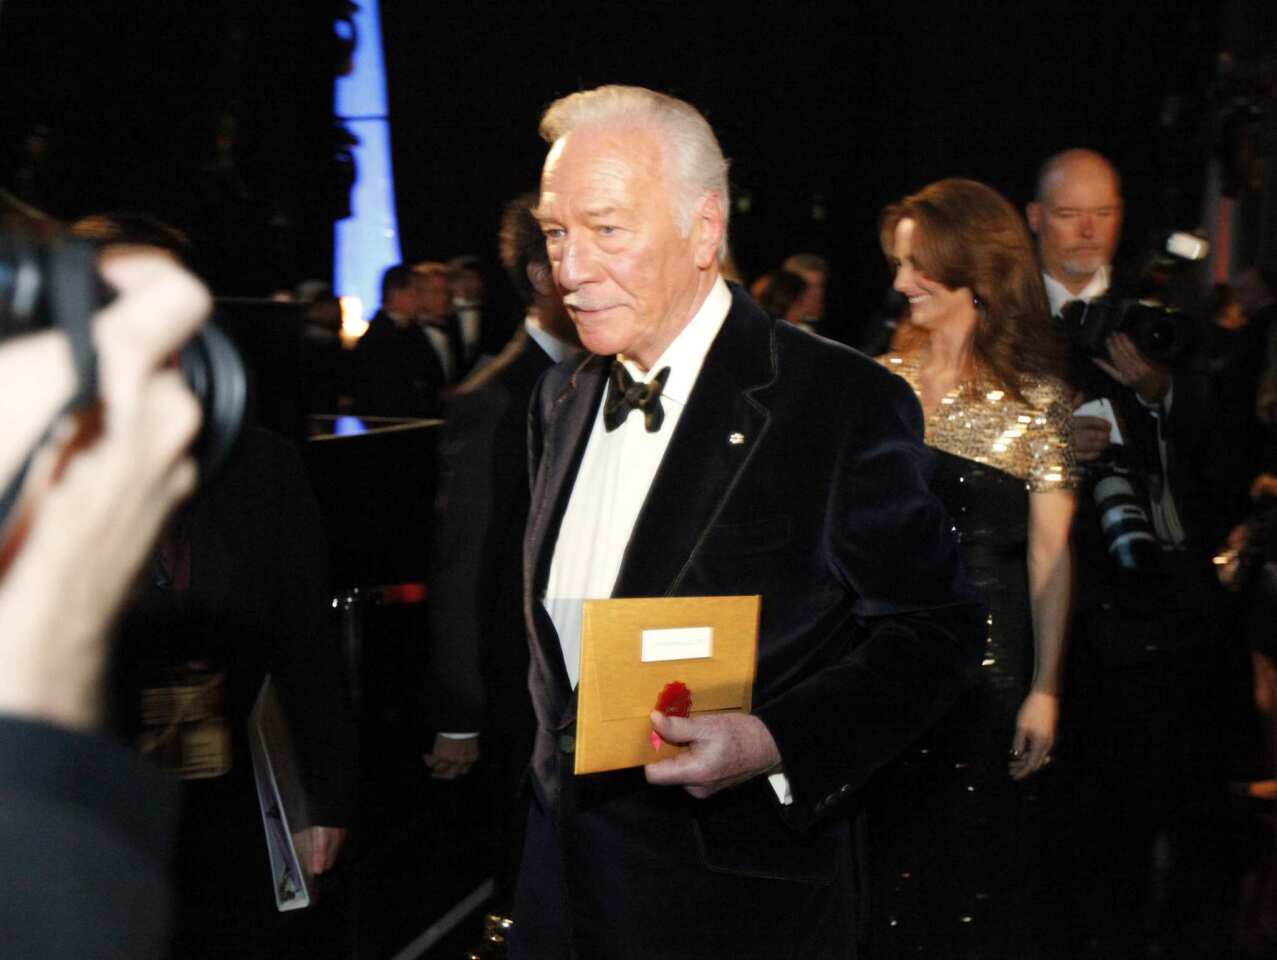 Christopher Plummer walks backstage after receiving his first Academy Award for his supporting role in "Beginners."